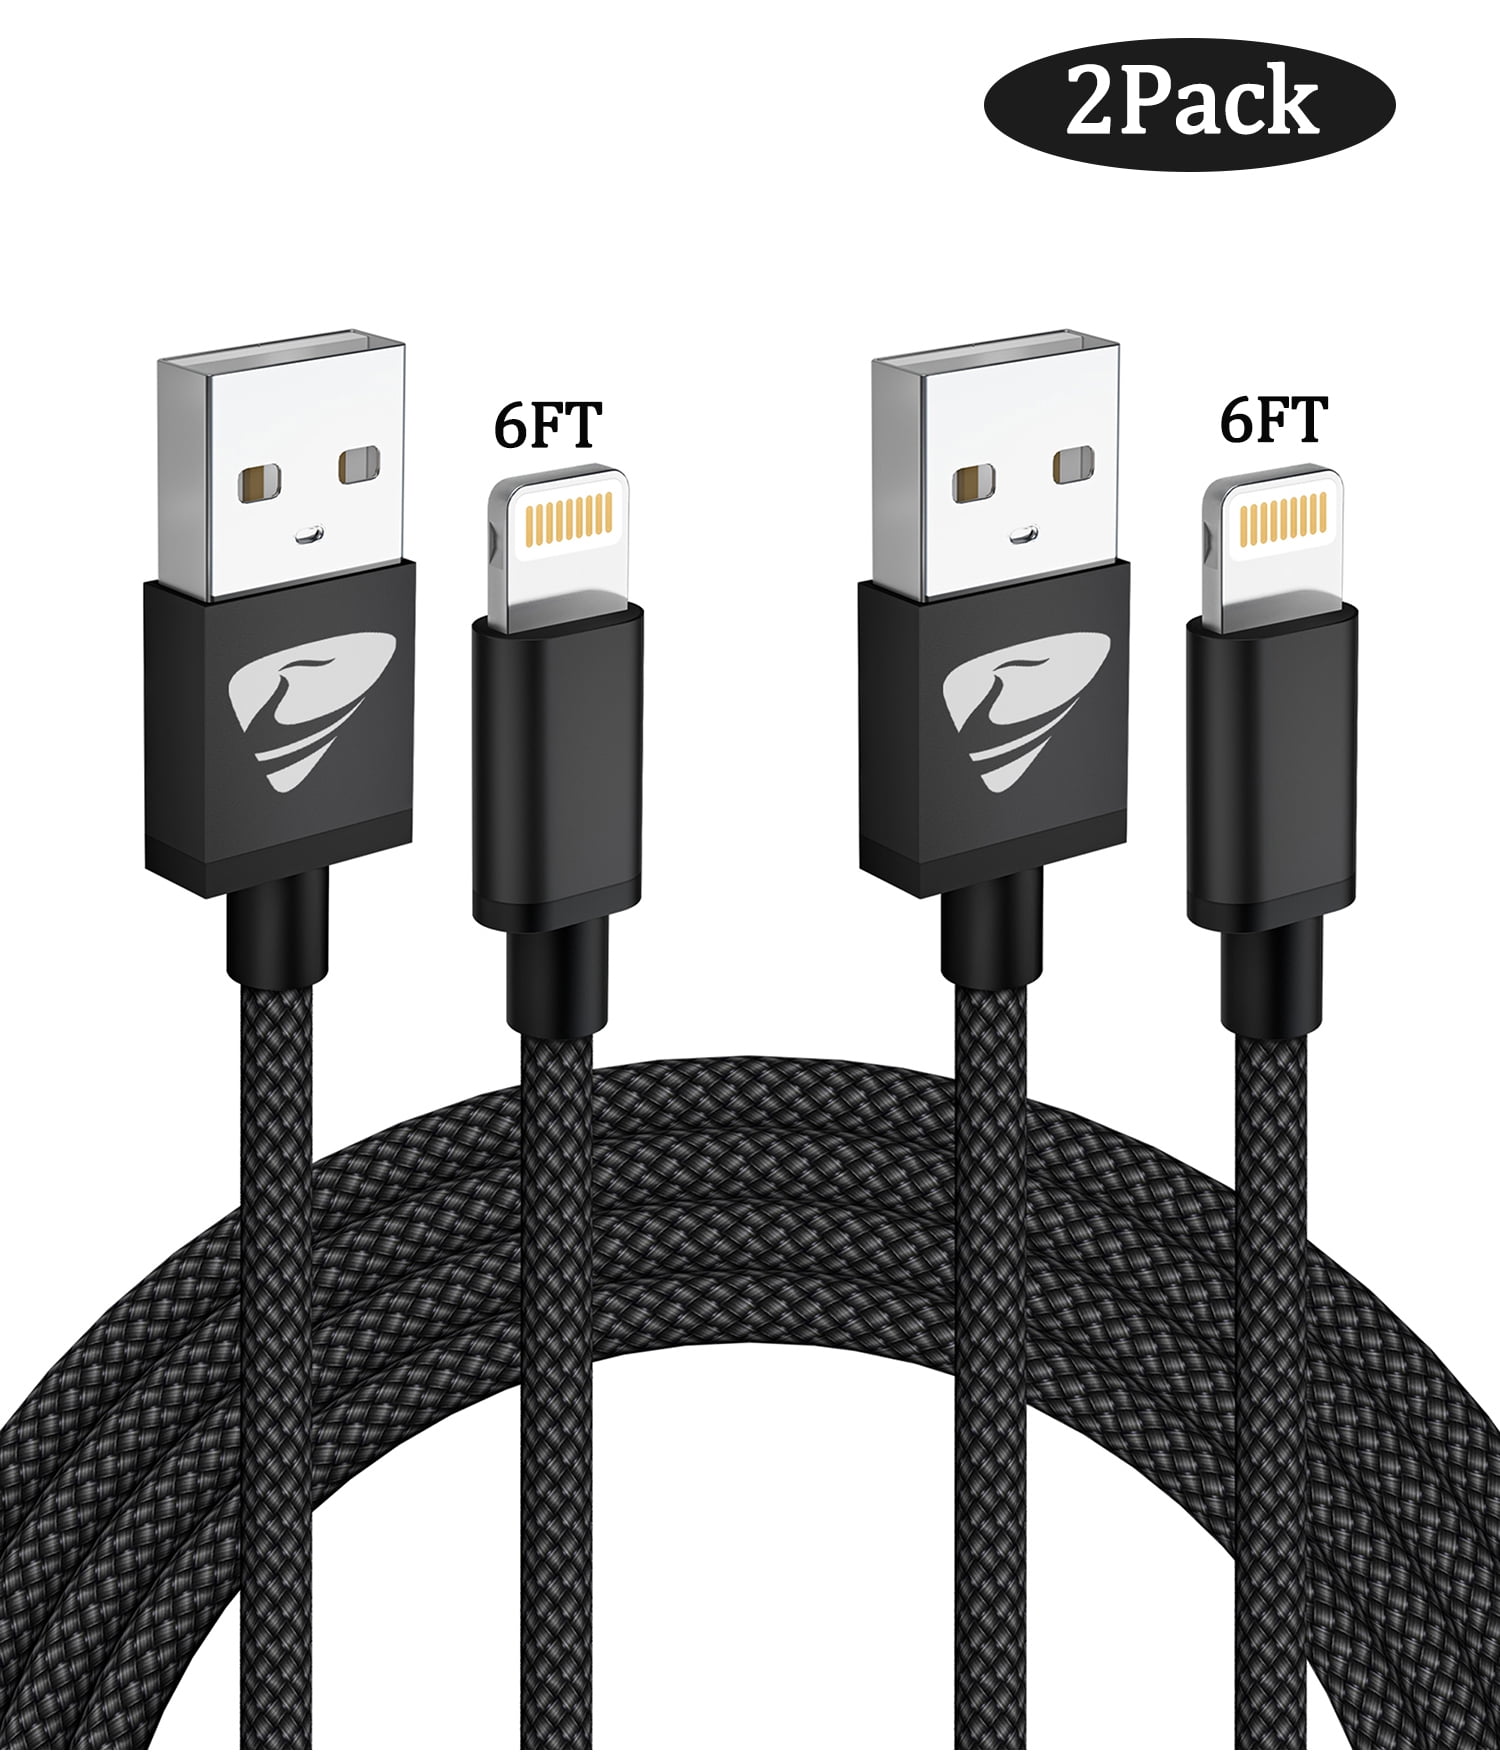 Aioneus iPhone Charger Cable 2x6FT Lightning Cable Nylon Braided USB  Charging Cable Data Sync Charge Cord for iPhone 13/12/11 Pro Max/XS MAX/XR/XS/X/8/7/Plus/6S/6/SE/5S/iPad  